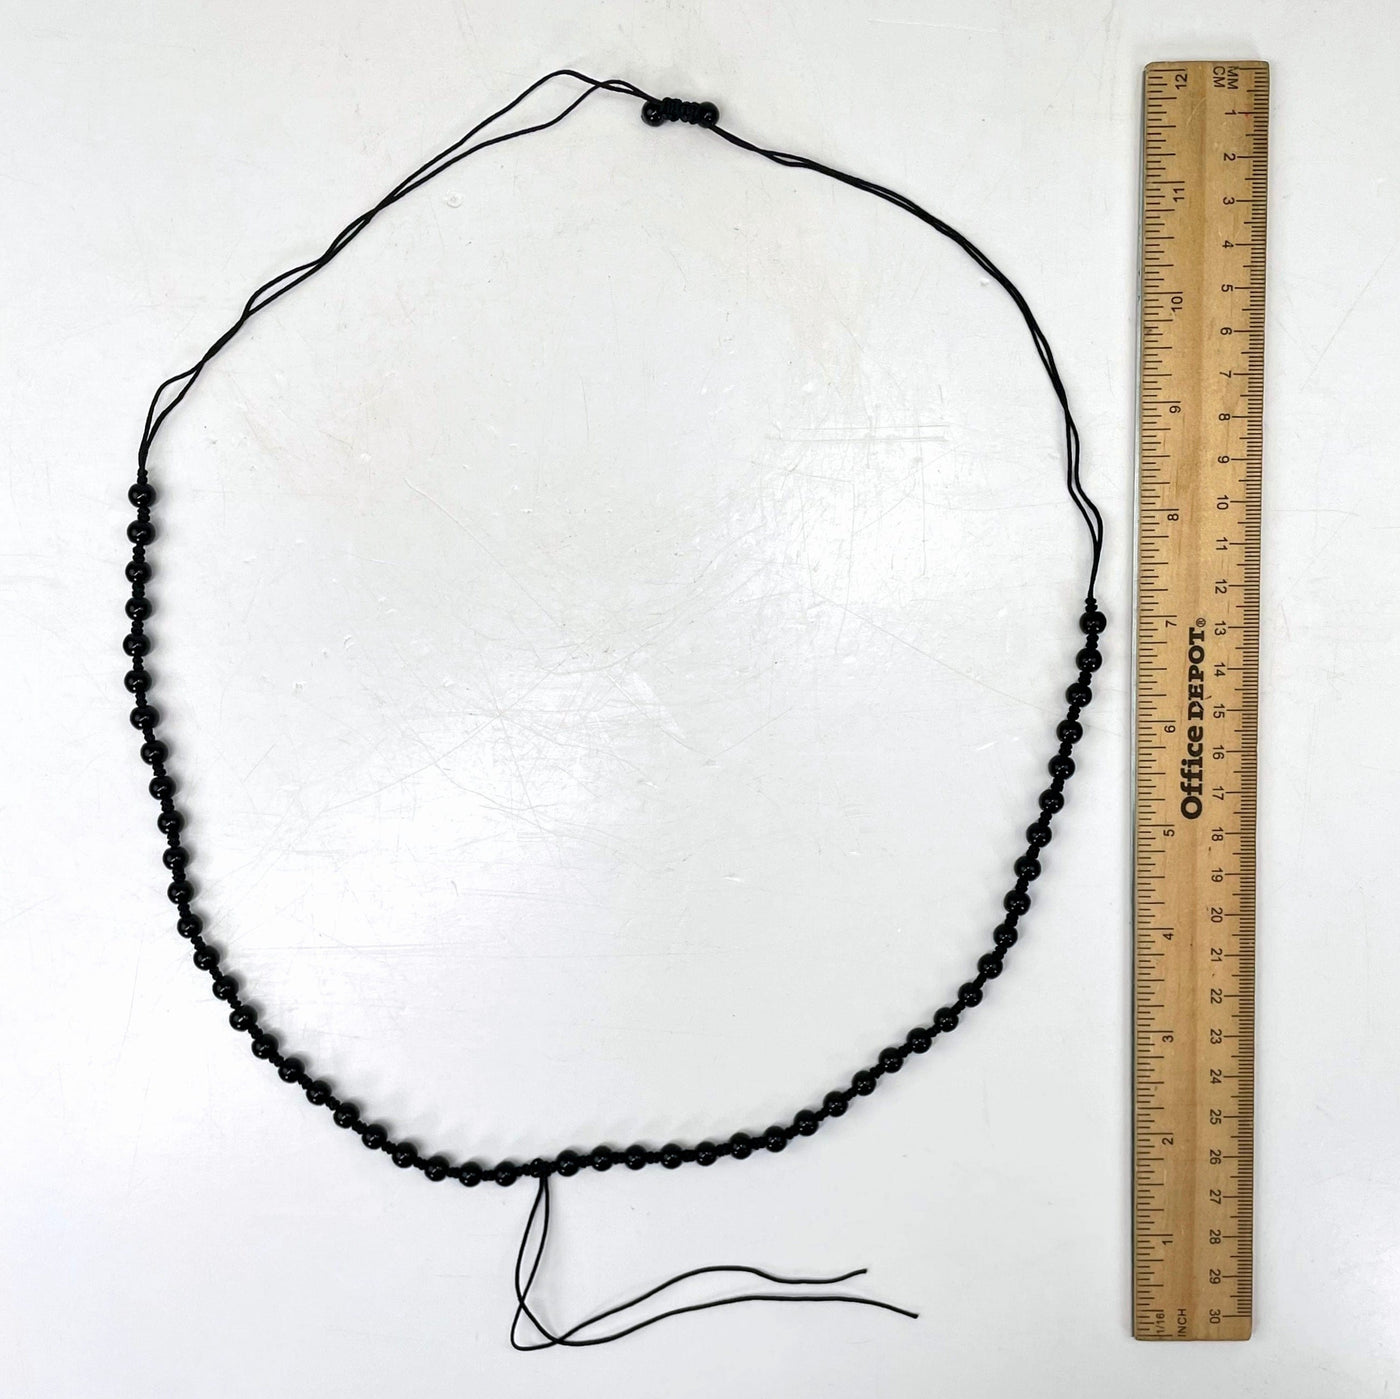 longest necklace length with ruler for size reference